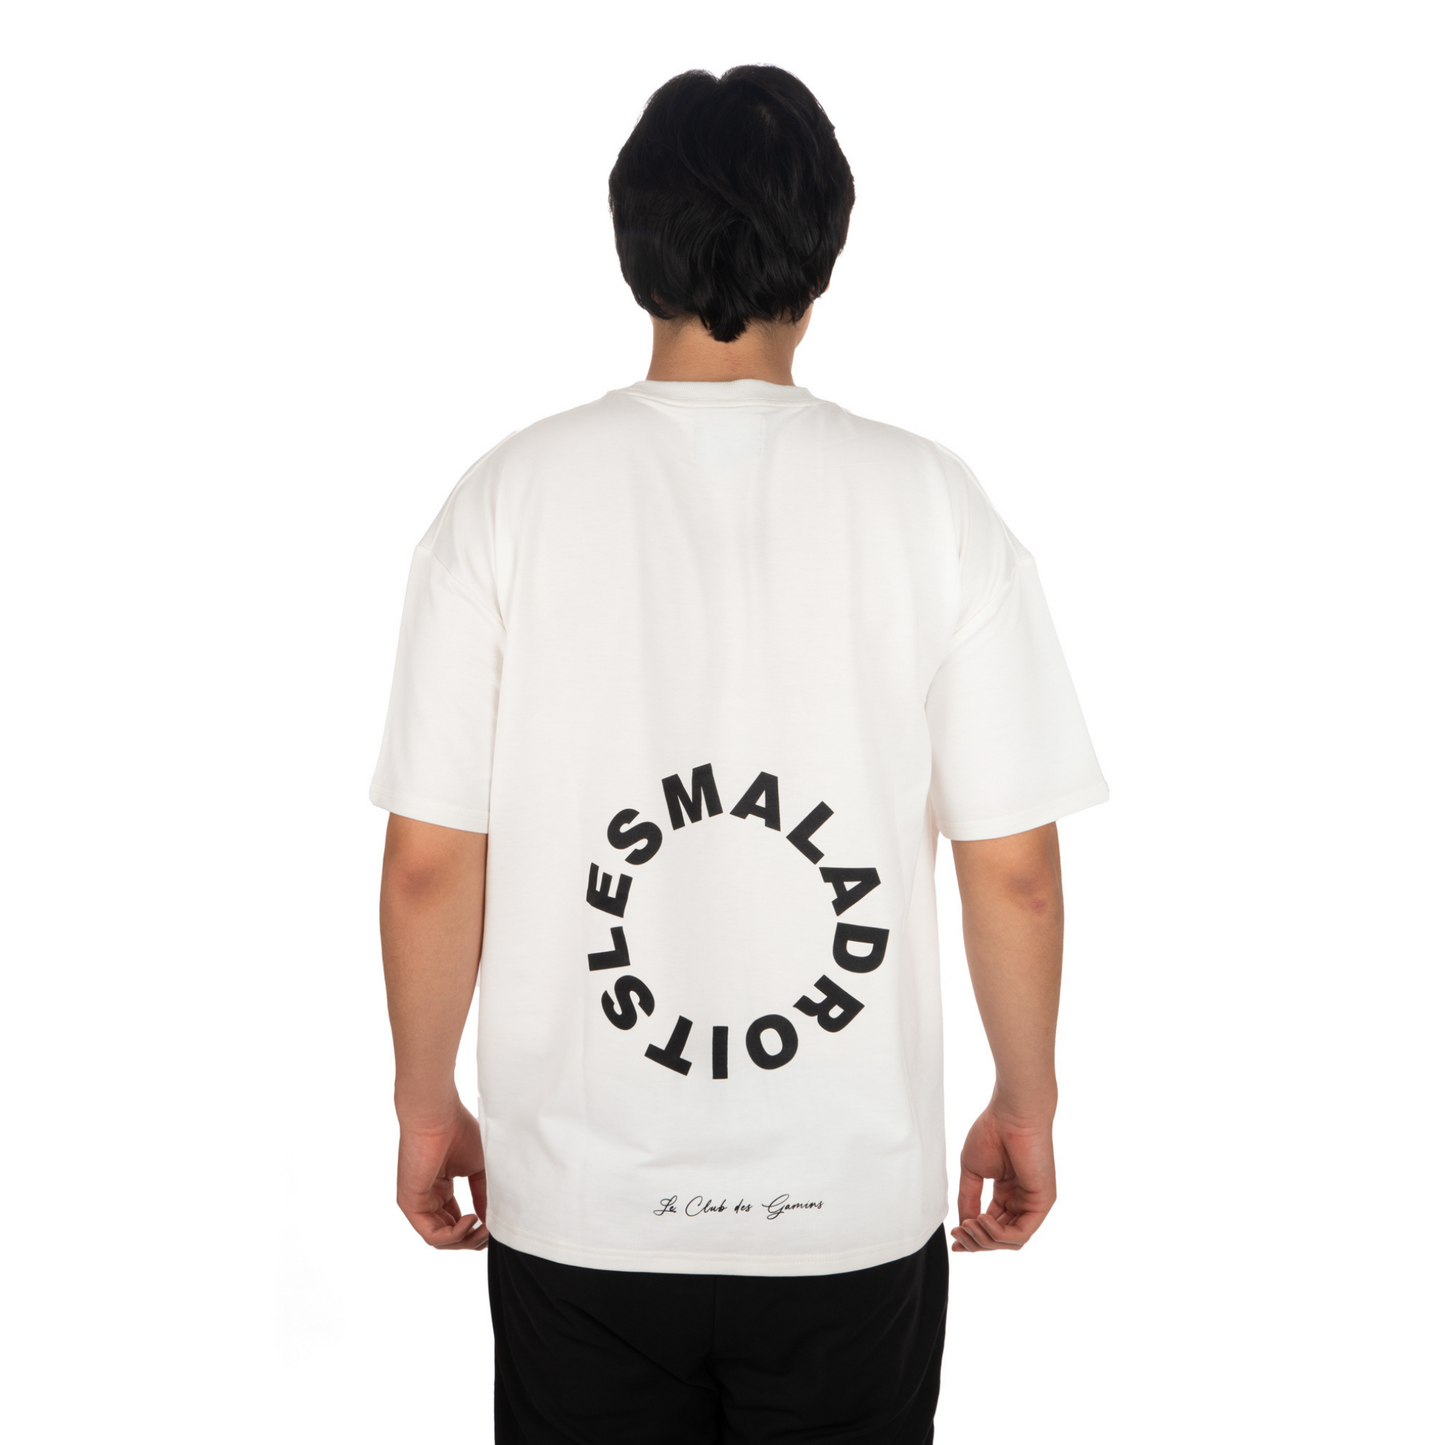 Unisex Oversized White T-shirt Le Club des Gamins back view on male model